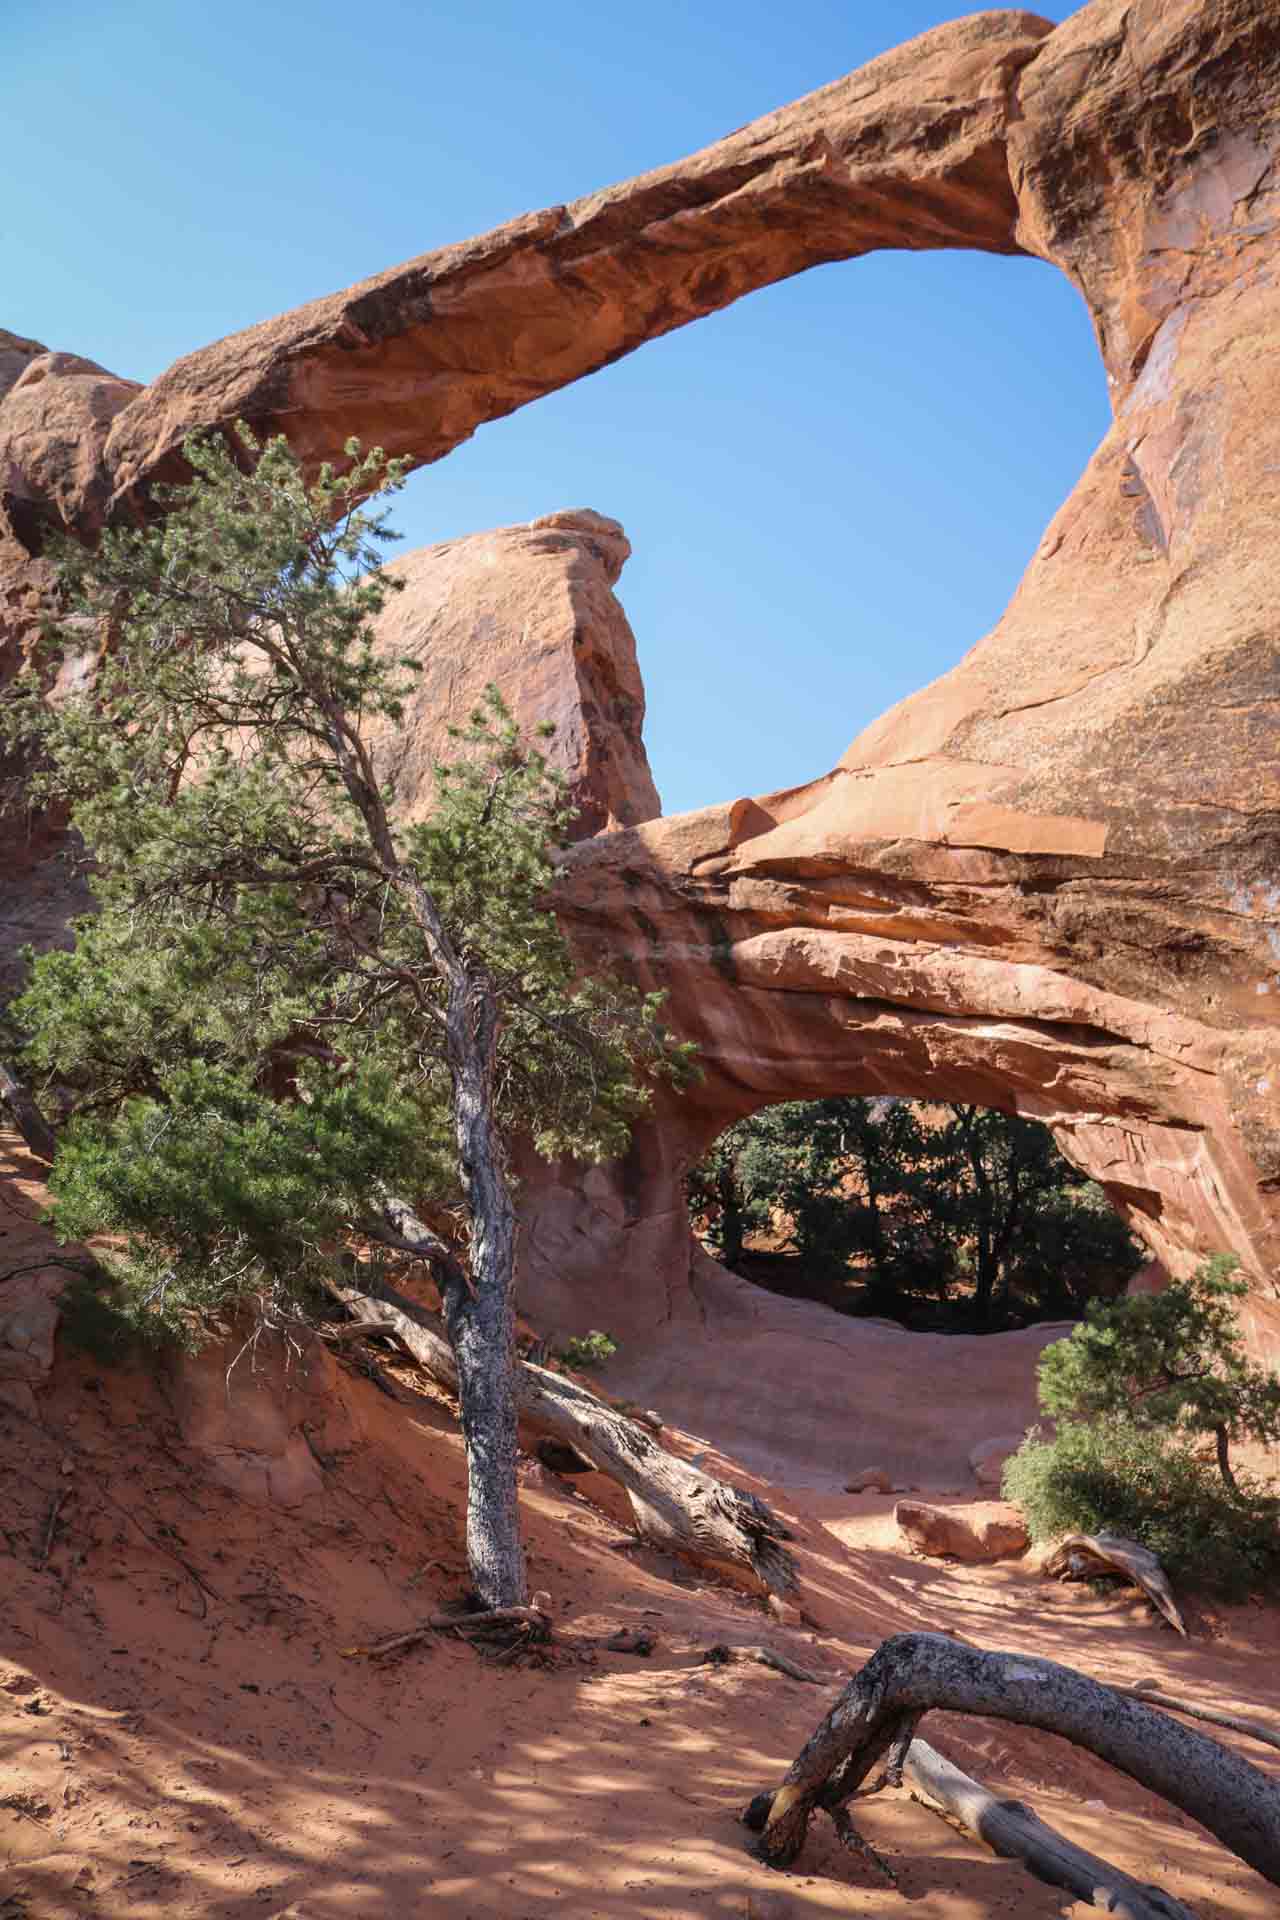 Double O Arch, Arches National Park, Utah